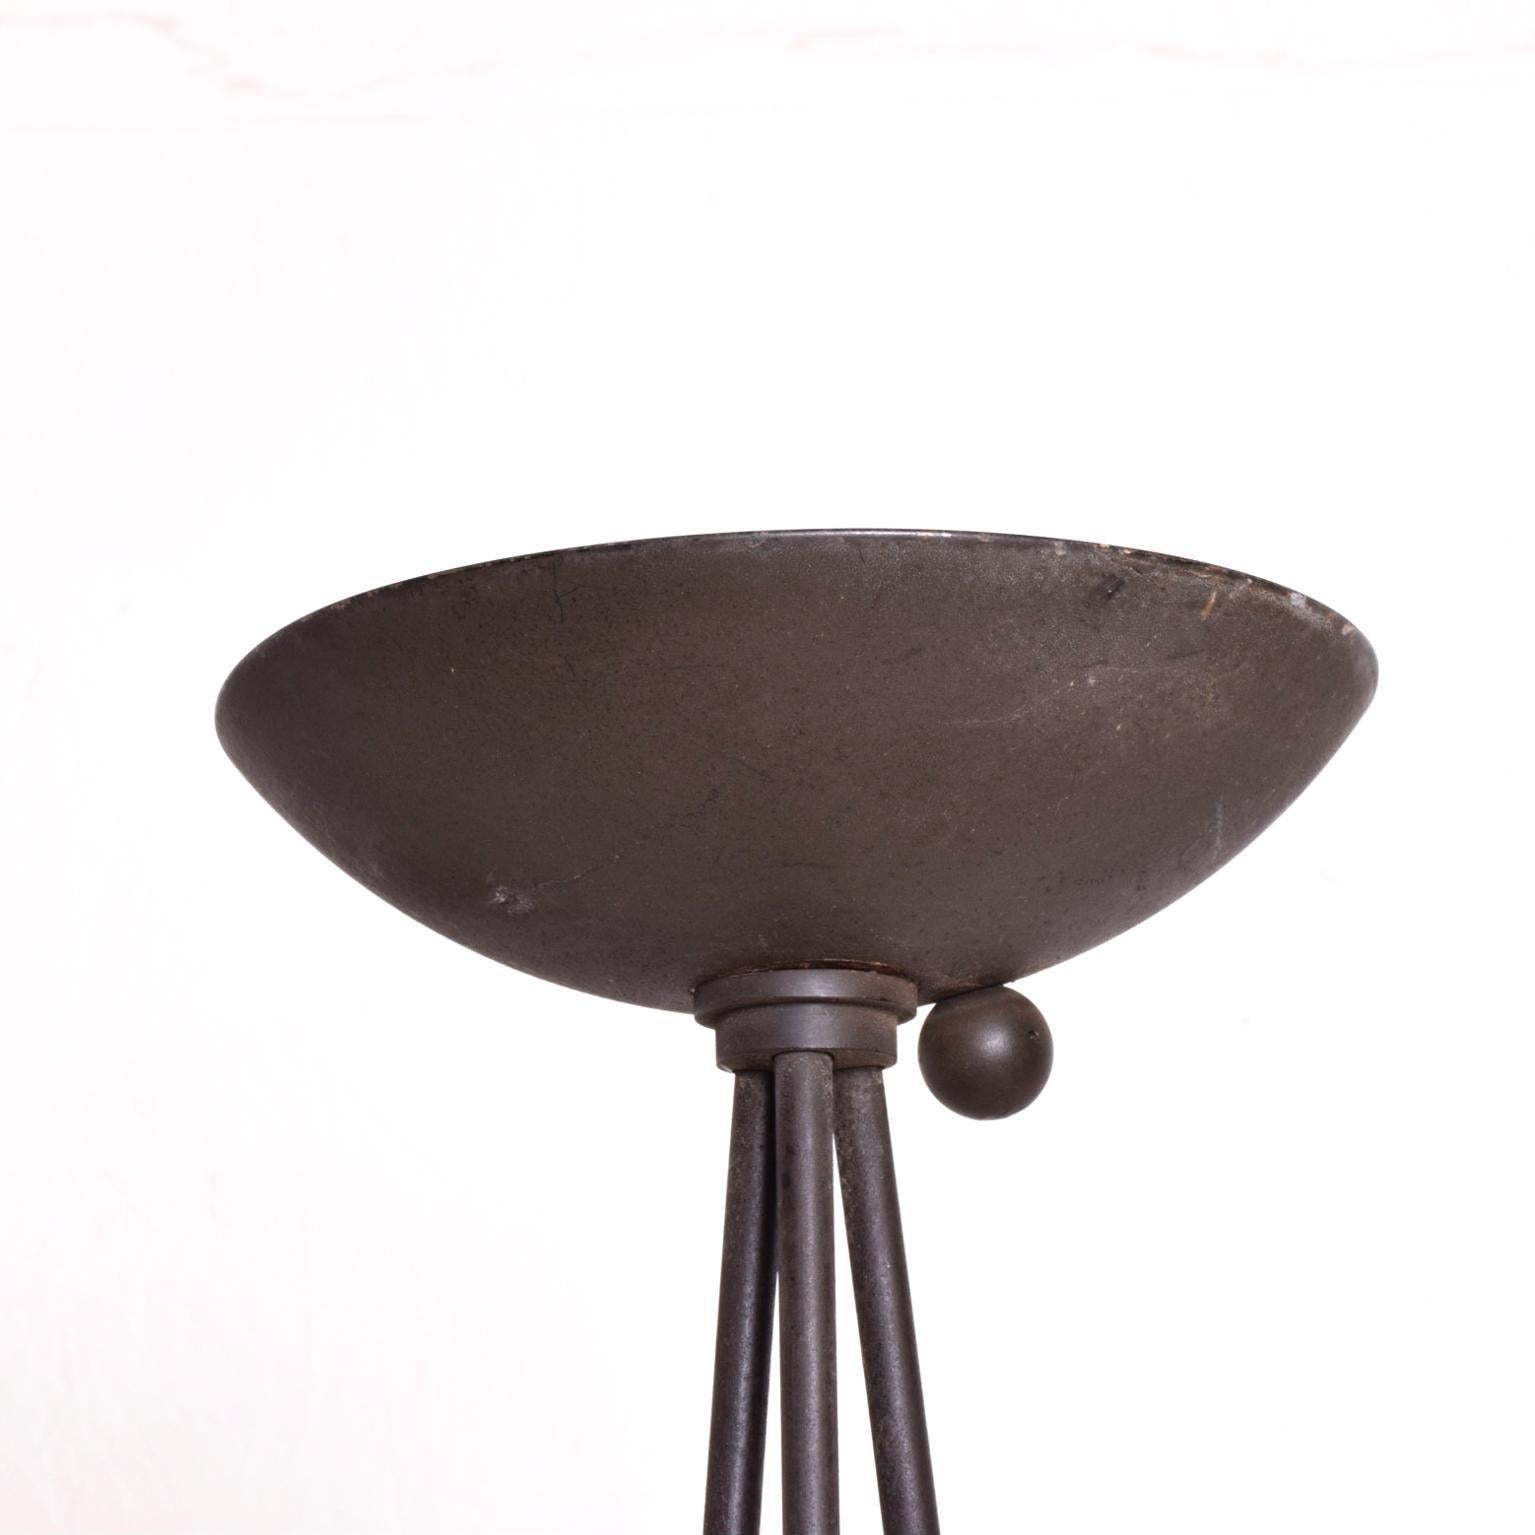 For your consideration:  Modern Tripod Floor Lamp Torchiere by Koch & Lowy.
Patinated steel.
Sleek and Sexy Memphis style modern torchiere floor lamp.  
Tested and currently working.
Dimensions: 72.5 height x 16 in diameter.
Original fair vintage